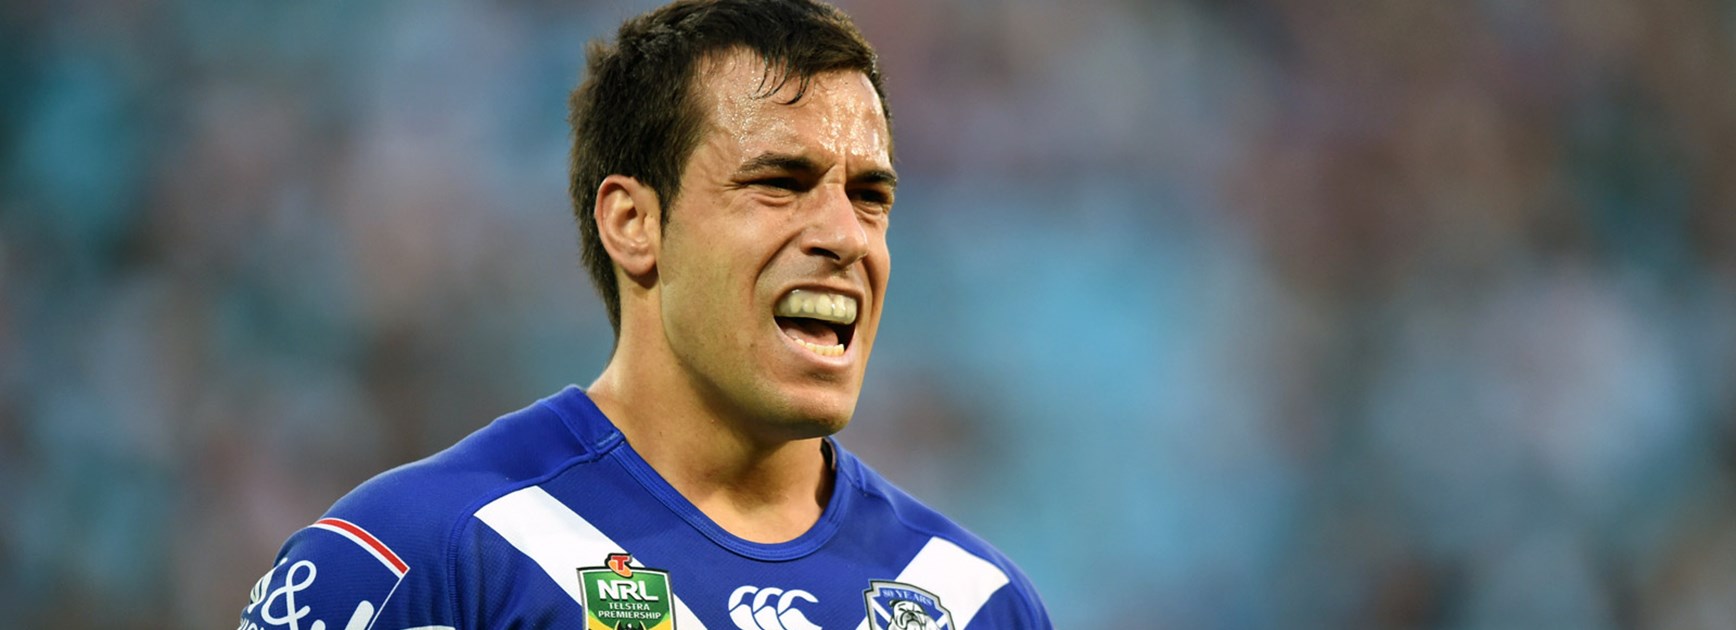 Bulldogs winger Corey Thompson is hoping to extend his stay at the club beyond this season.